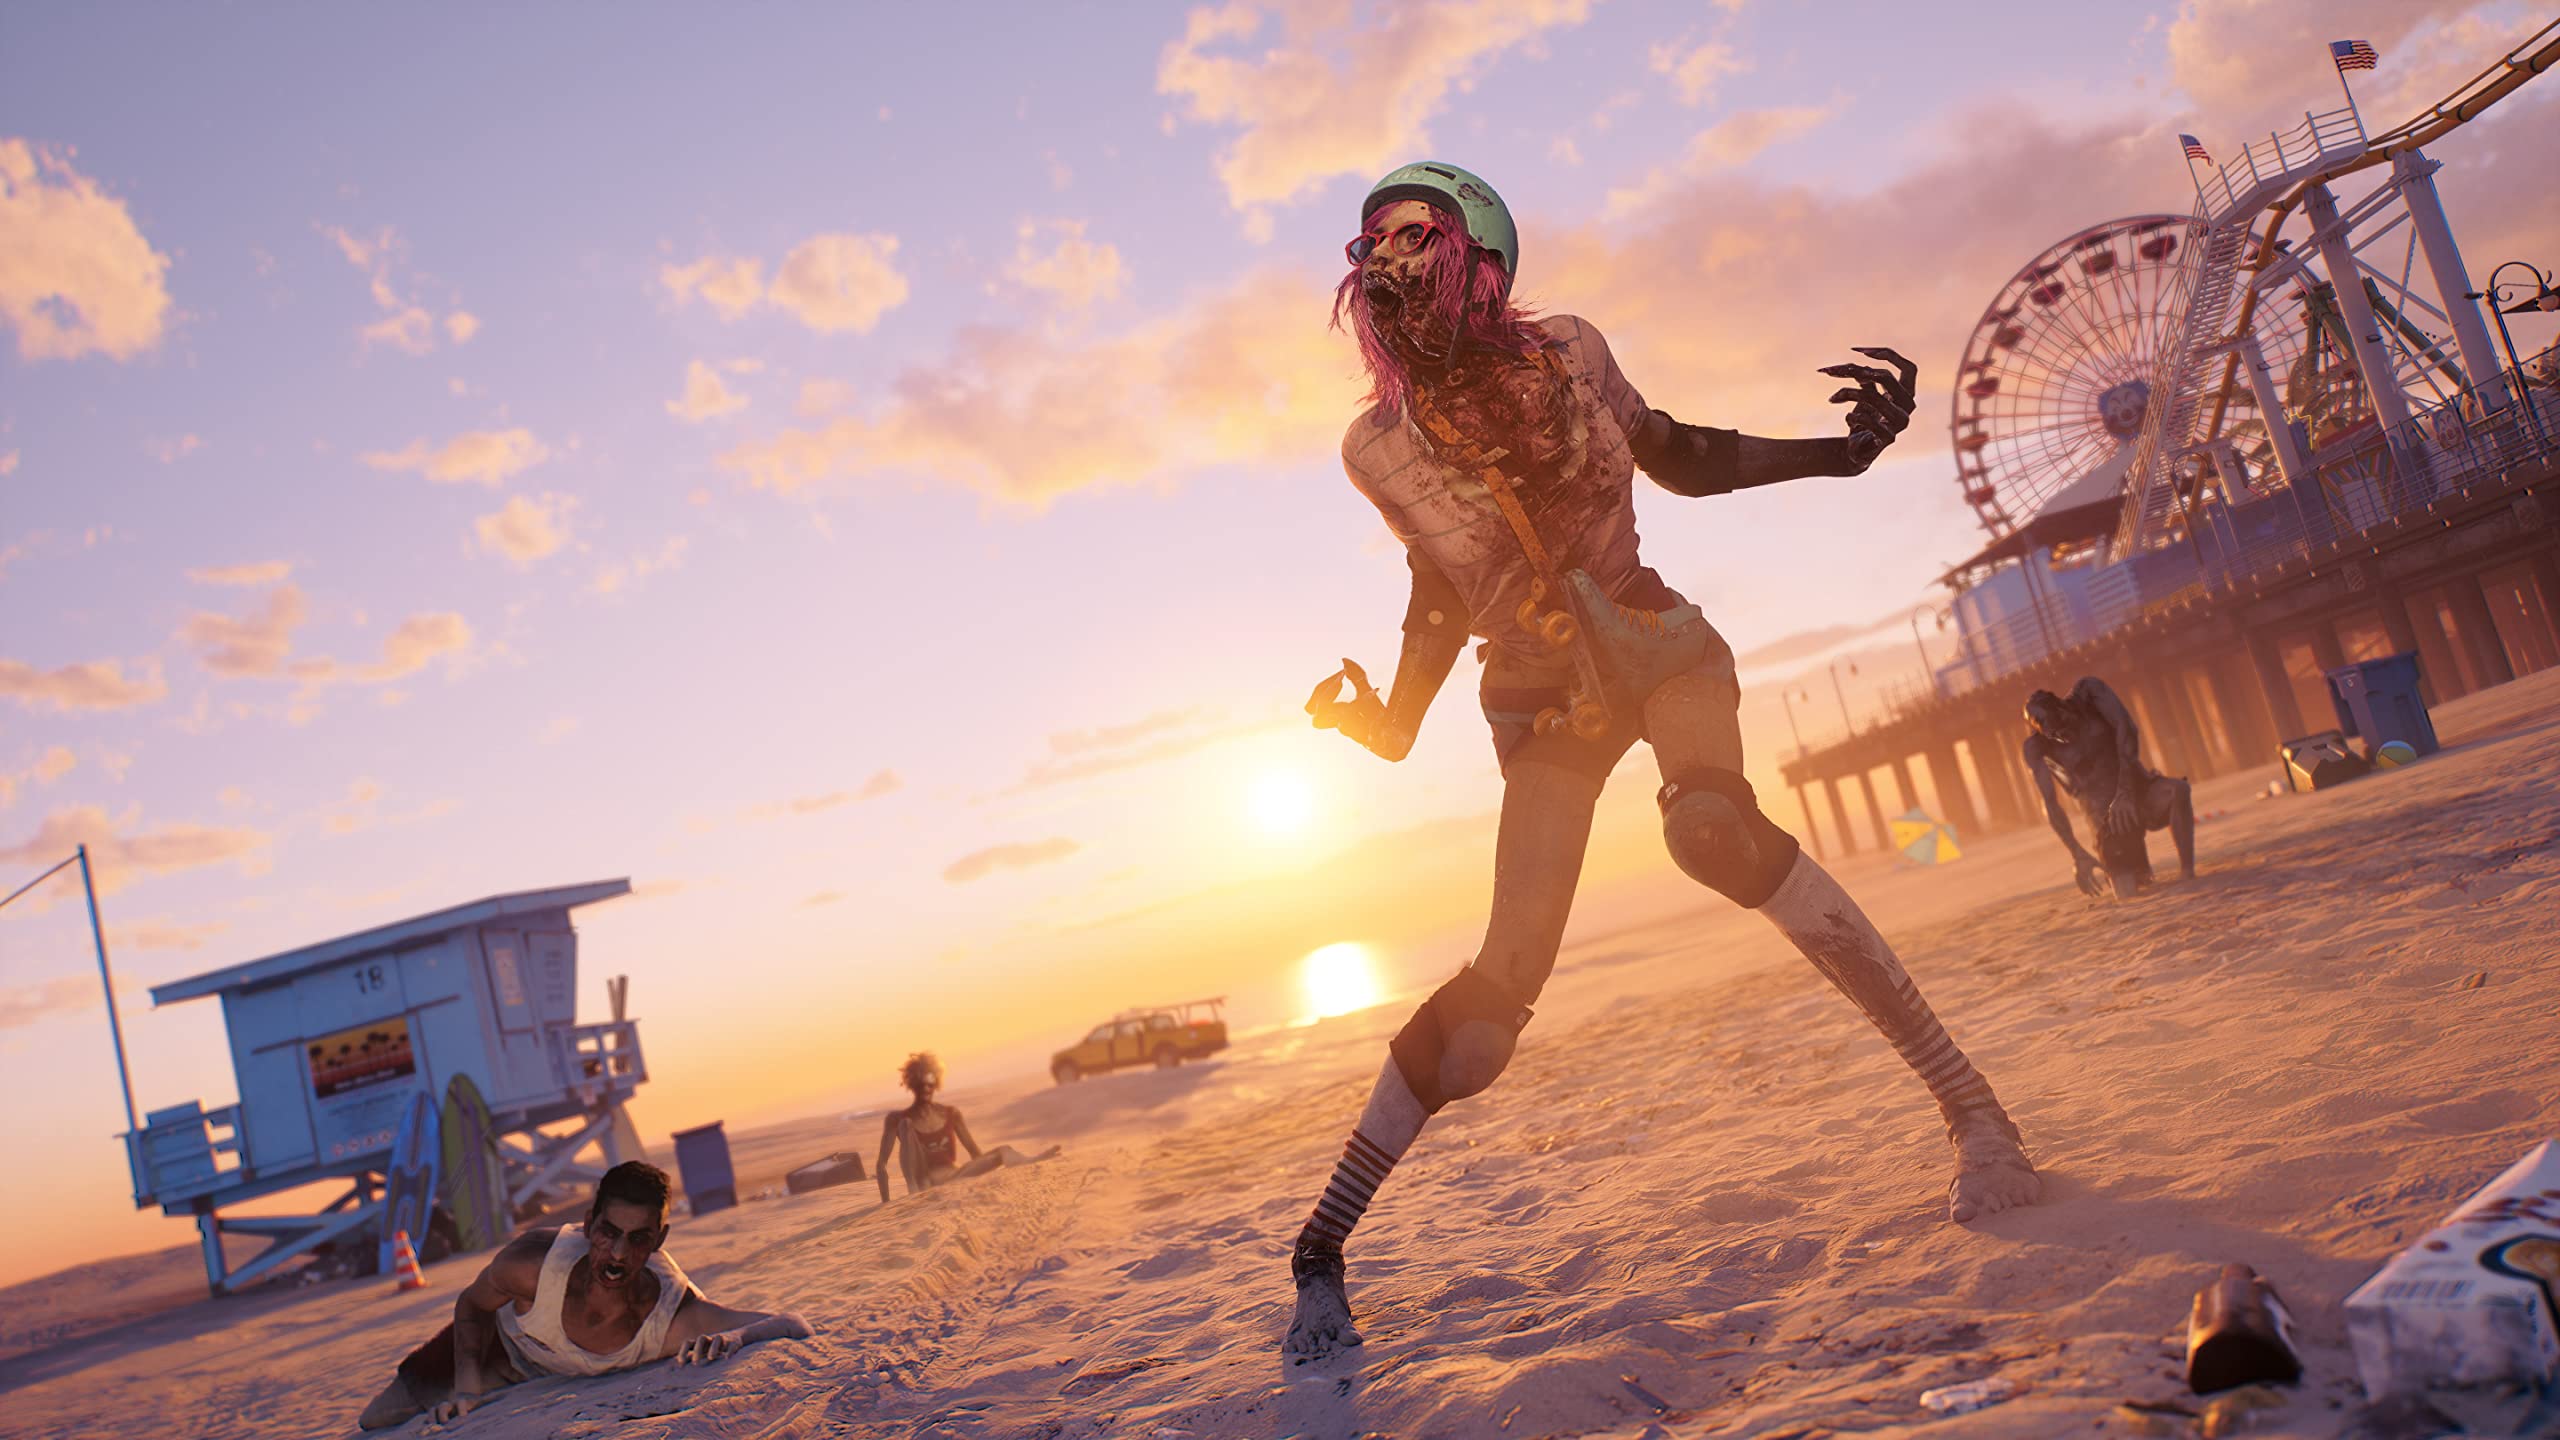 Review: Dead Island 2 – Welcome to HELL-A - XTgamer